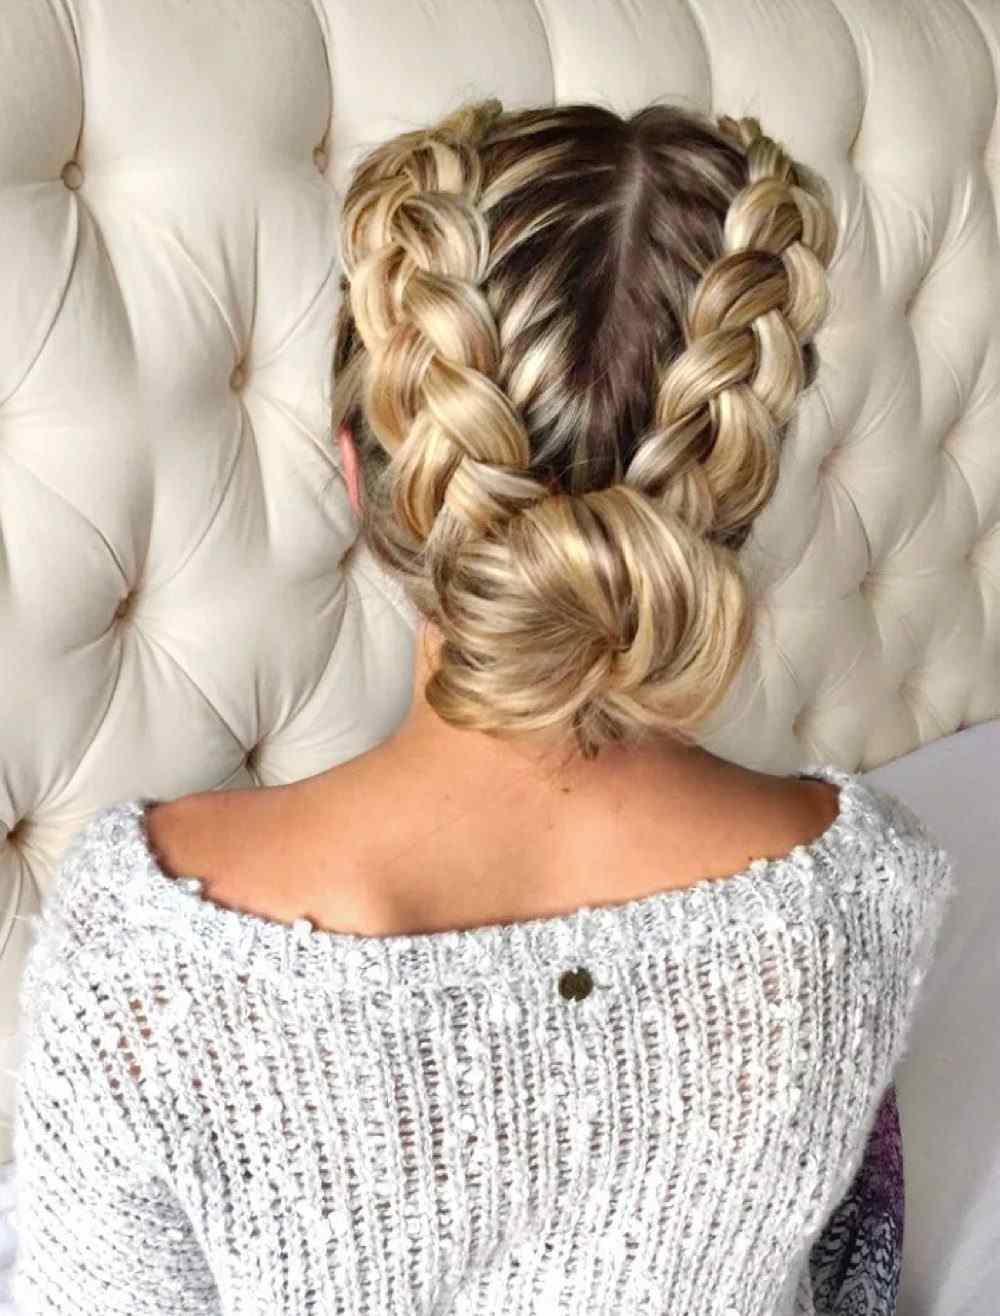 Hairstyles ideas soap guide Oktoberfest hairstyles for long hair